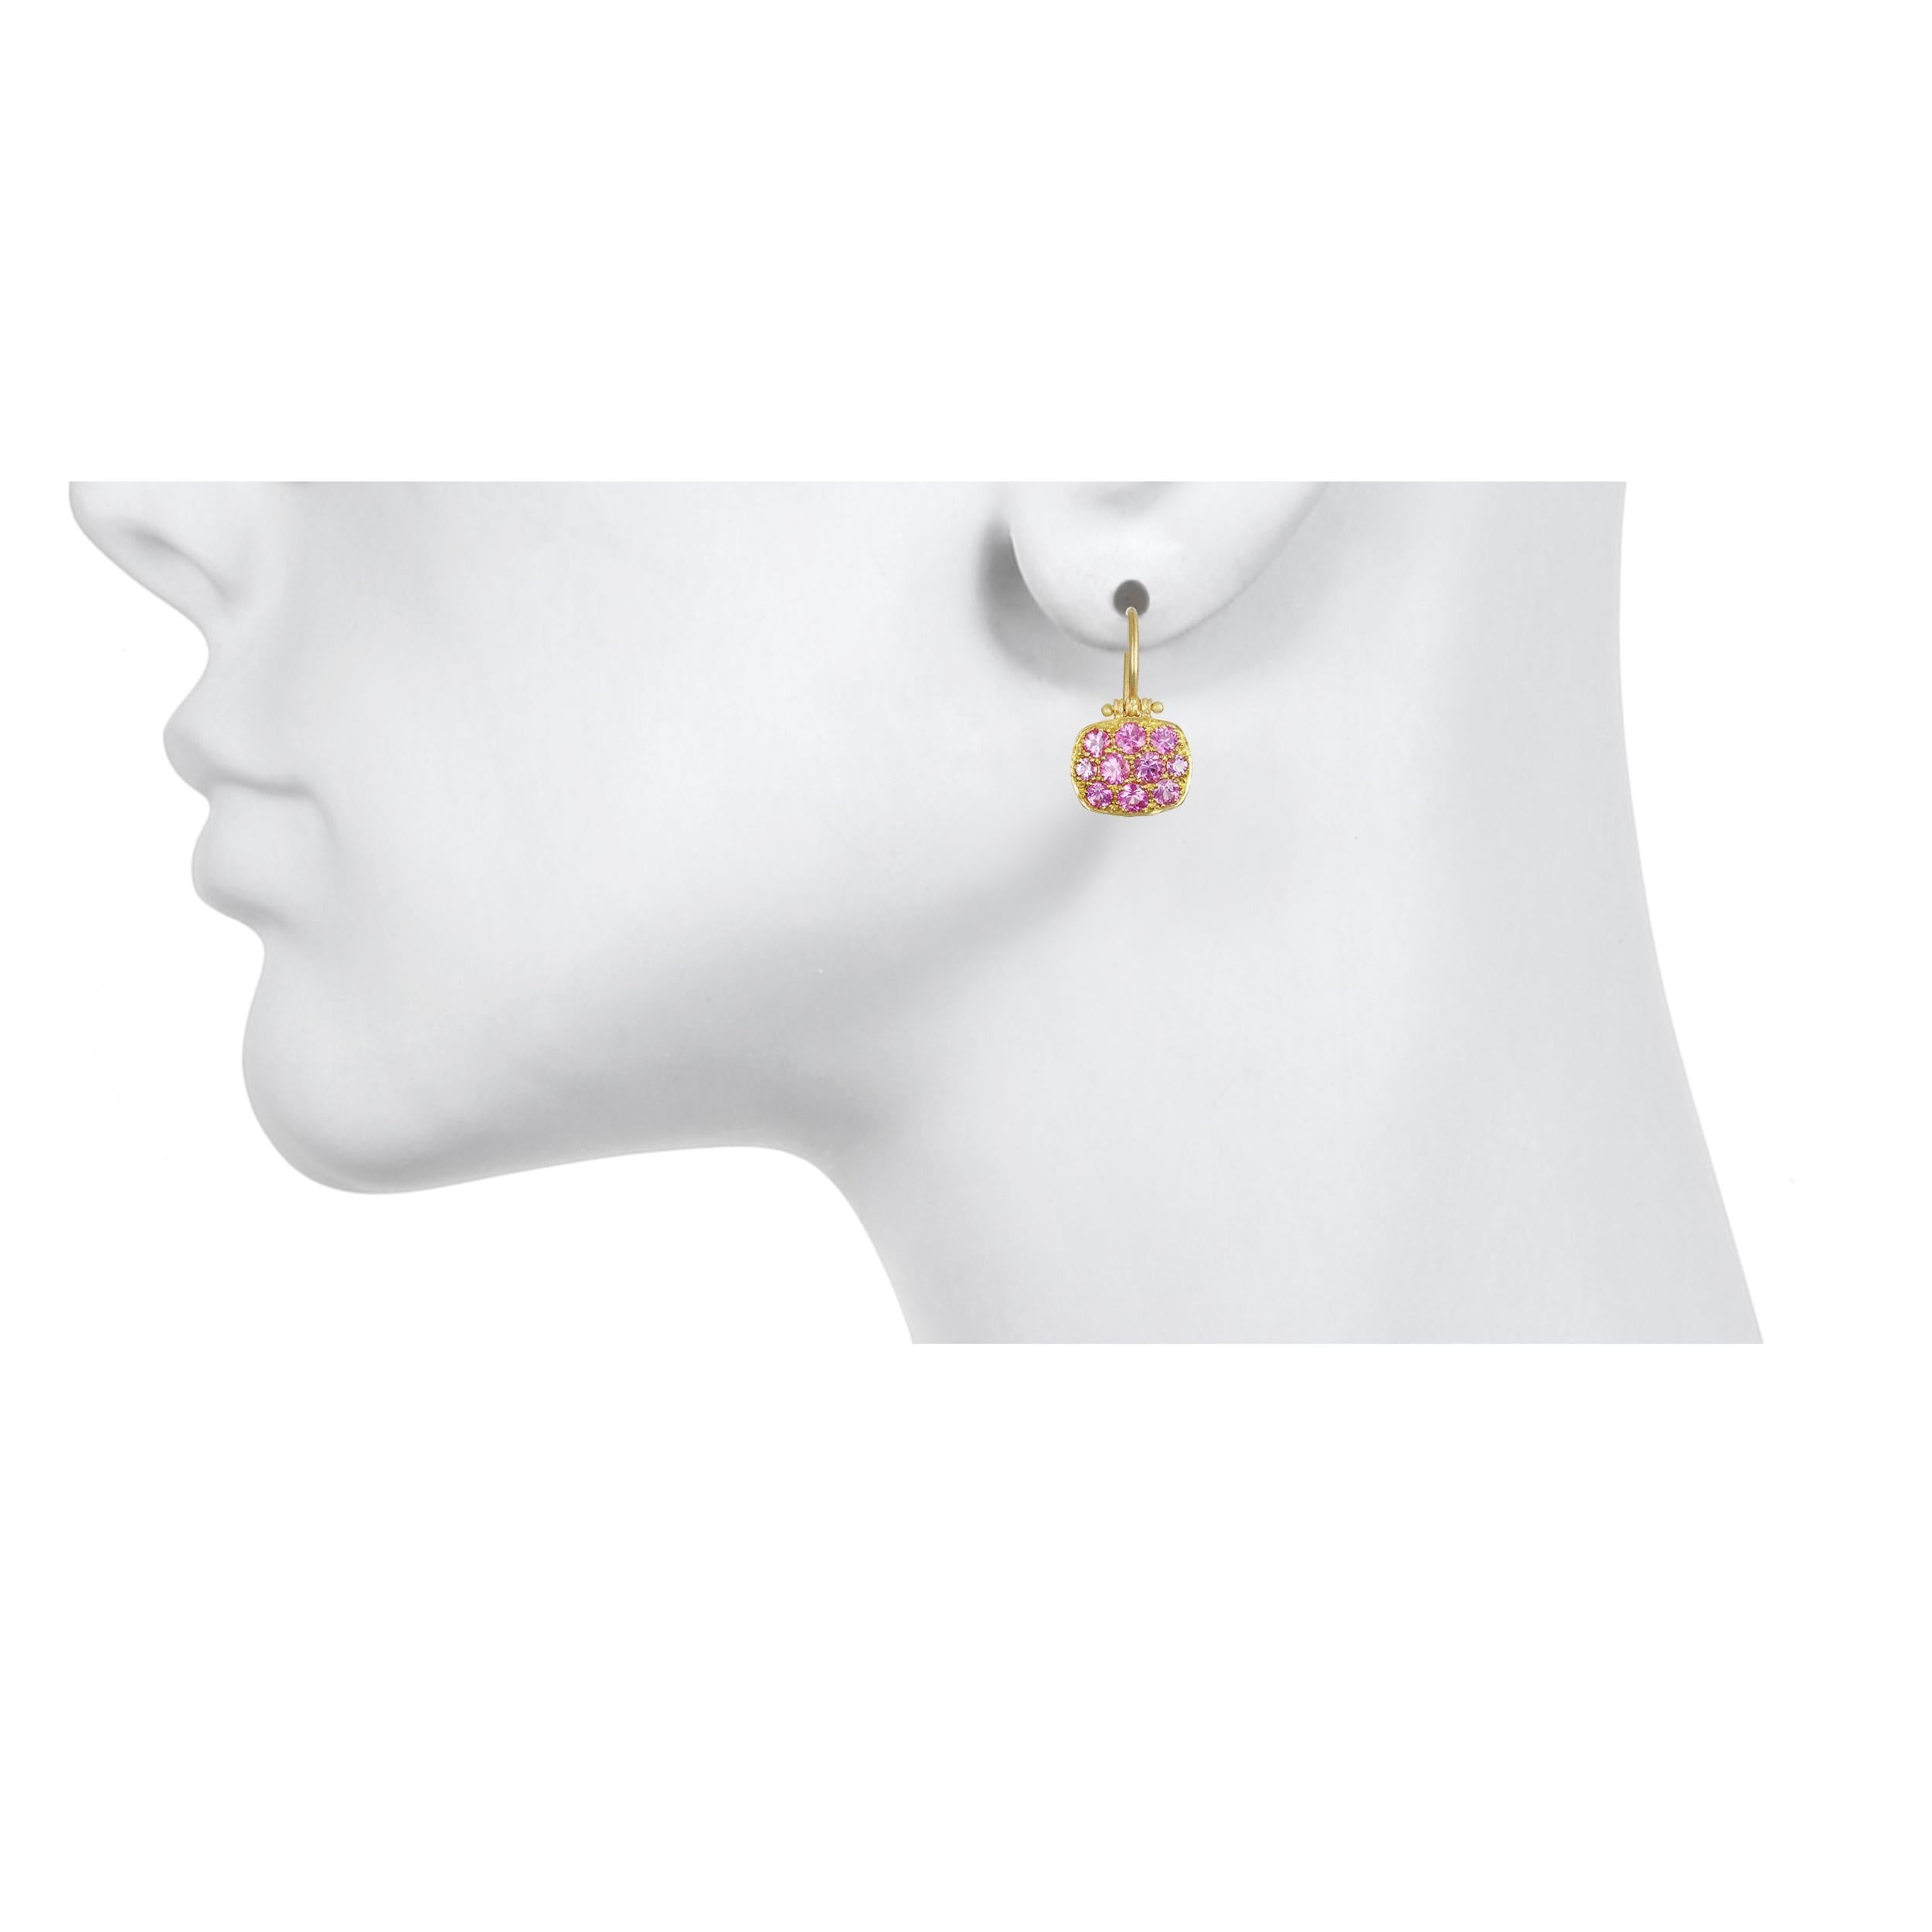 Faye Kim 18 Karat Pink Sapphire Chiclet Earrings 

These bright and happy pink sapphire chiclet earrings have just enough sparkle to get noticed but with understated elegance.  Hinged for movement, uniquely shaped and light-weight make these